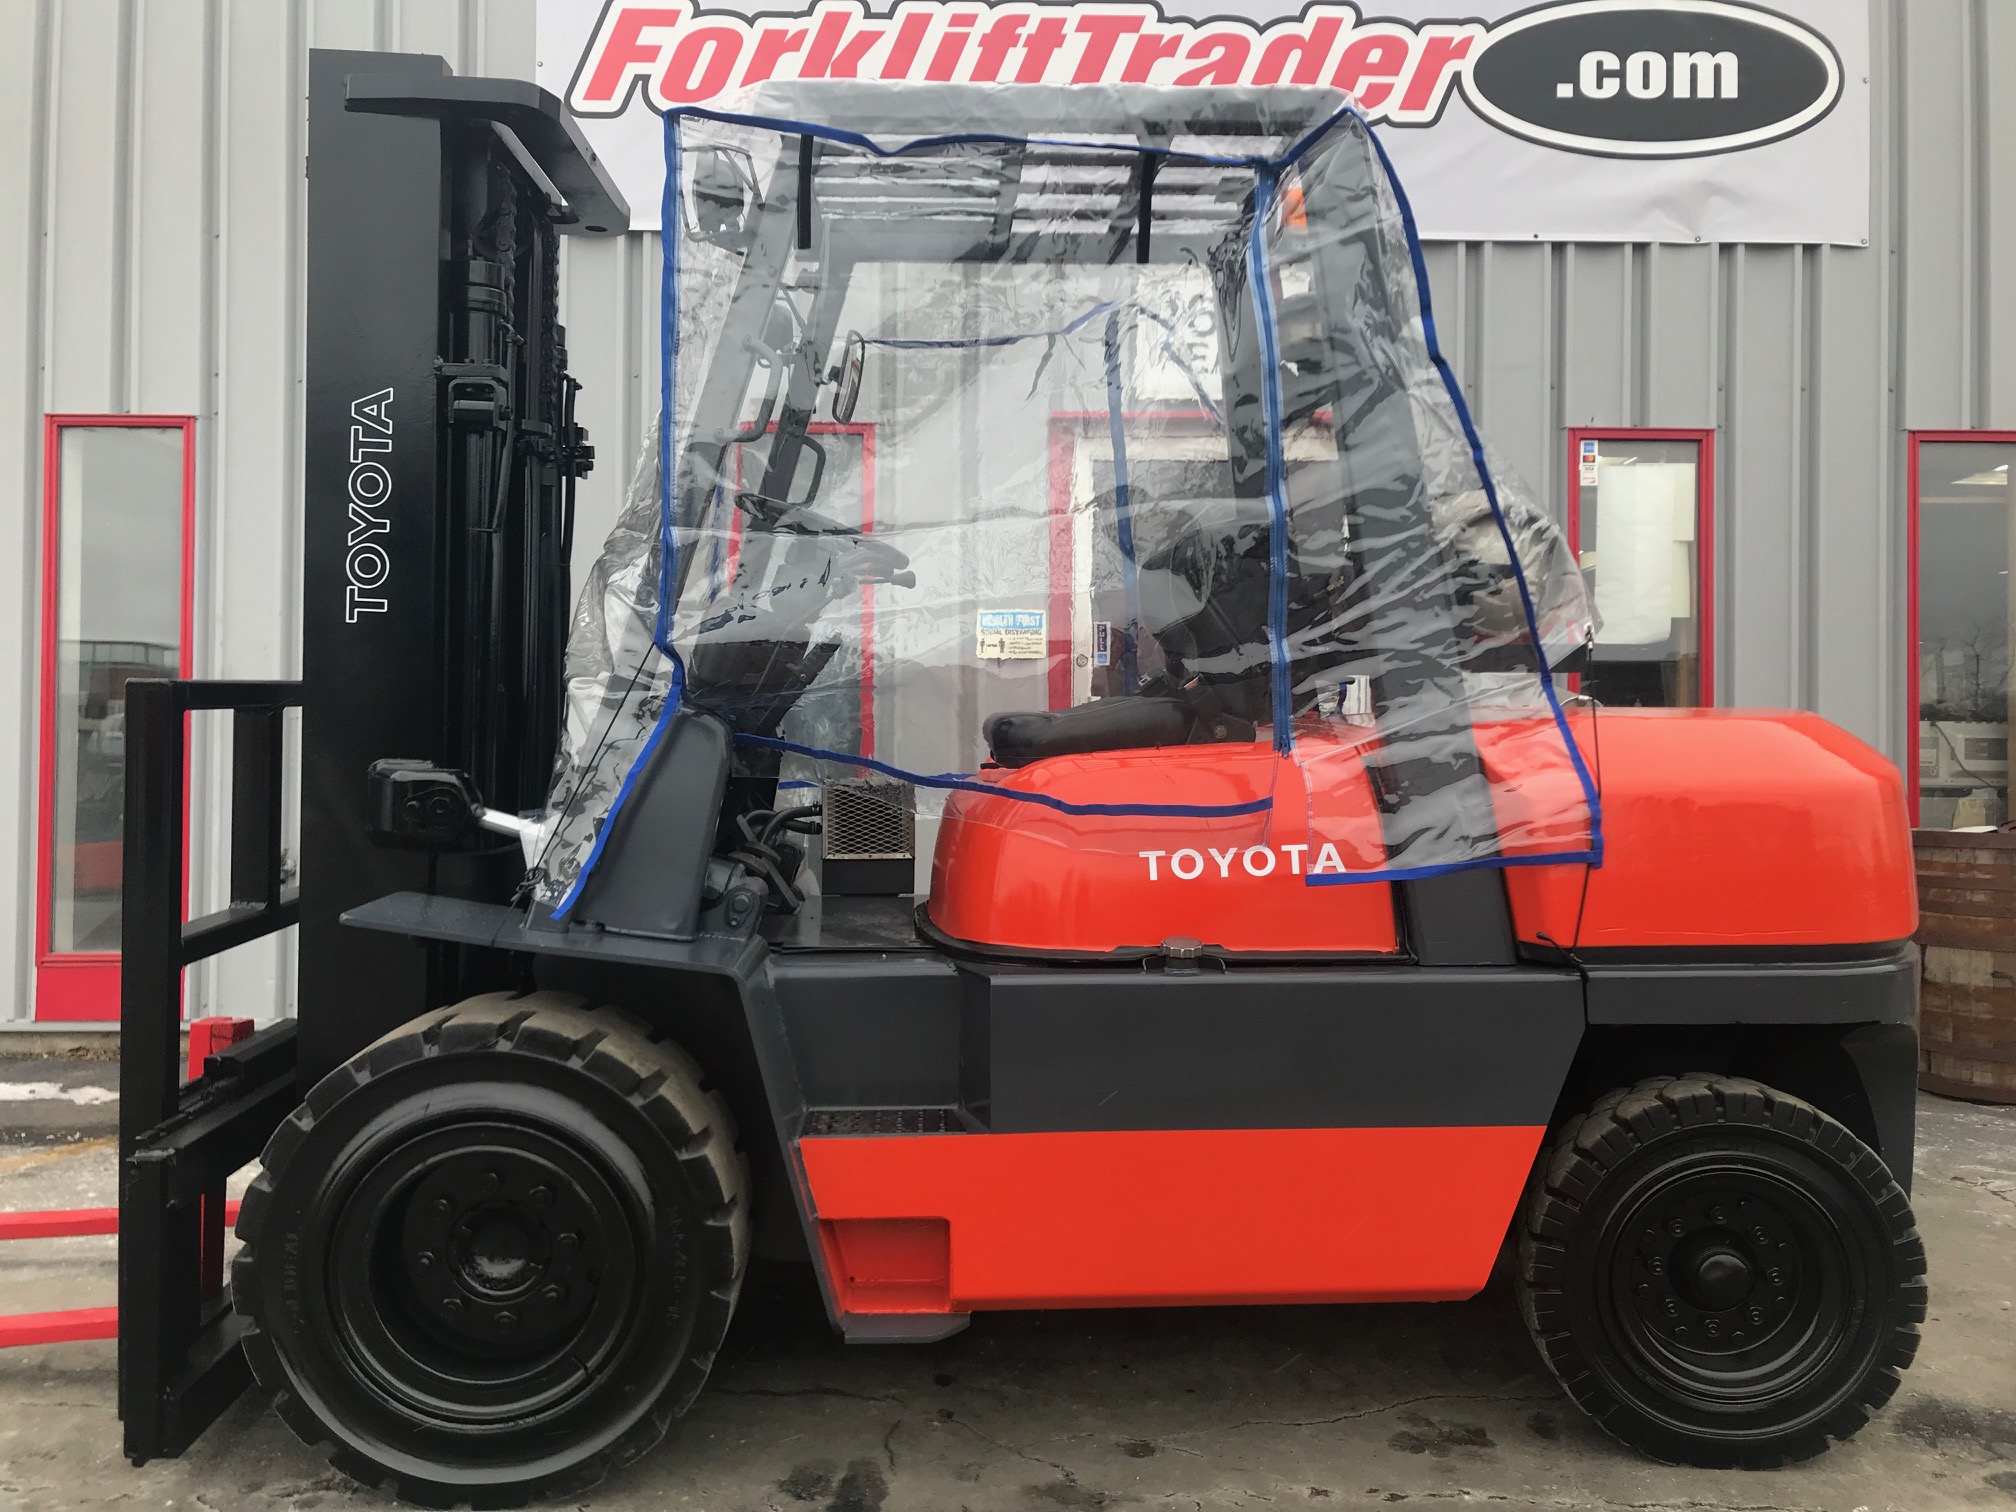 Orange toyota forklift with 130" lift height for sale